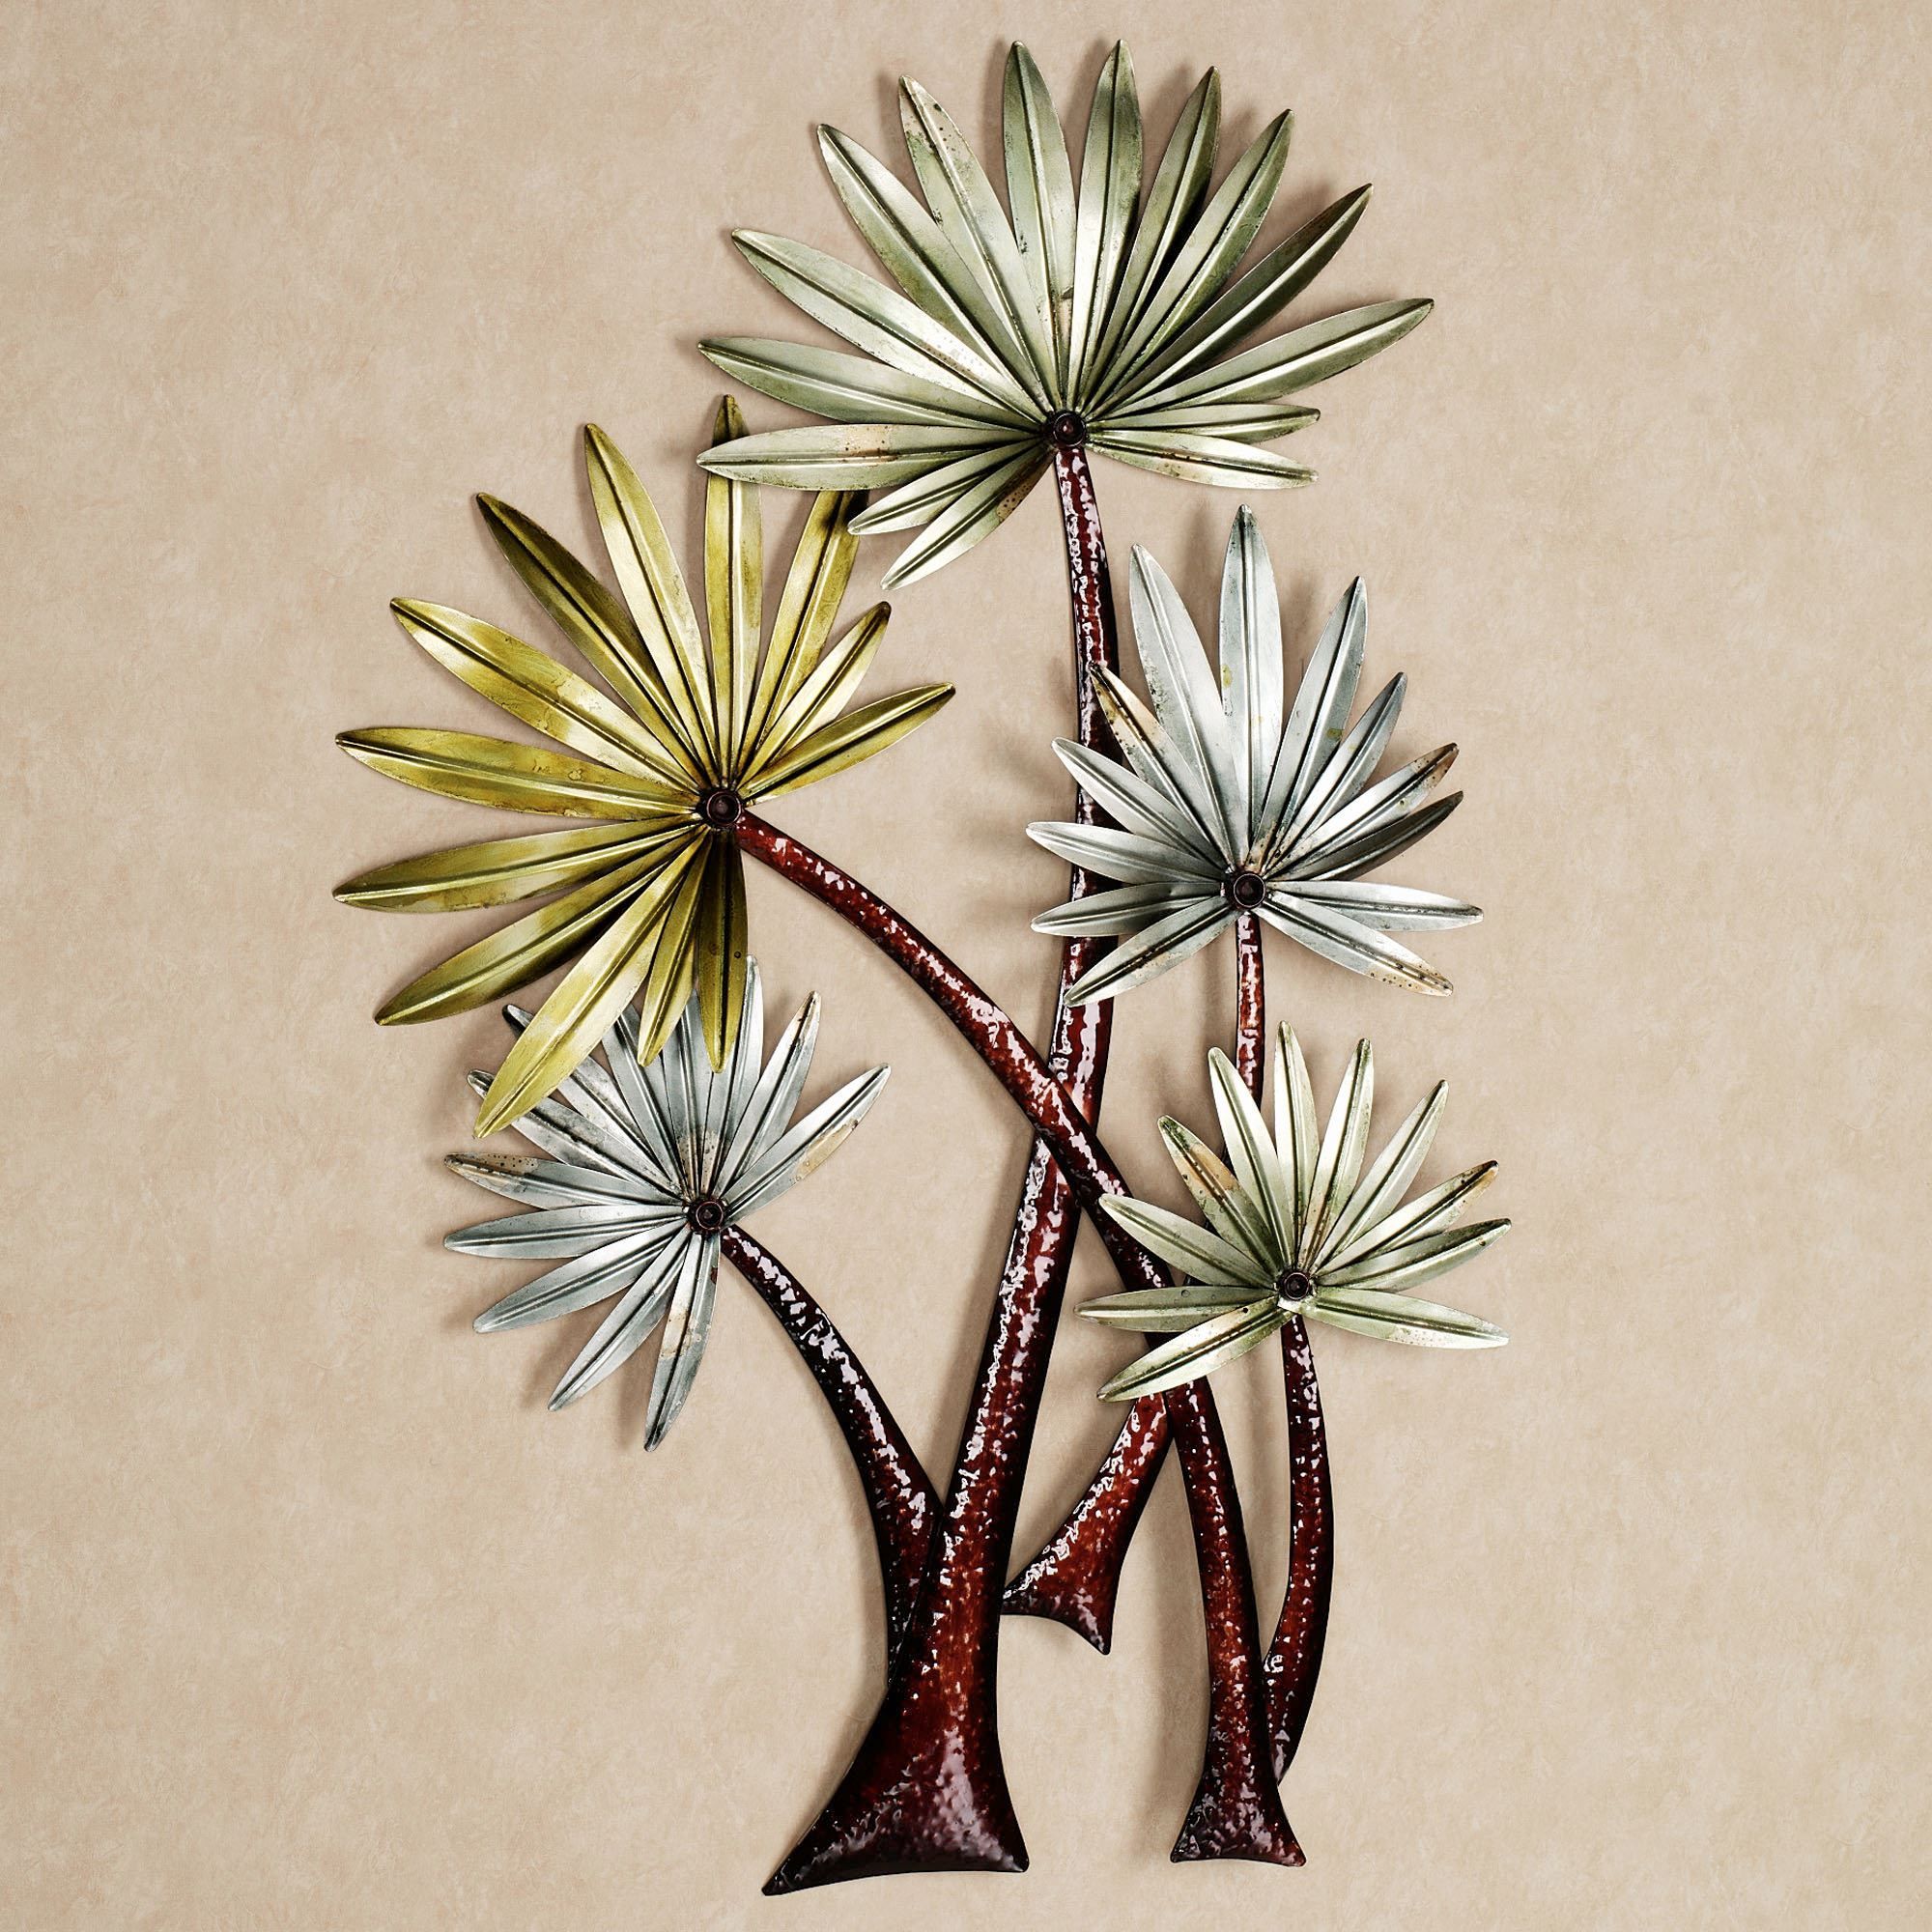 Caribbean Retreat Tropical Palm Metal Wall Sculpture Inside Best And Newest Sparks Metal Wall Art (View 6 of 20)